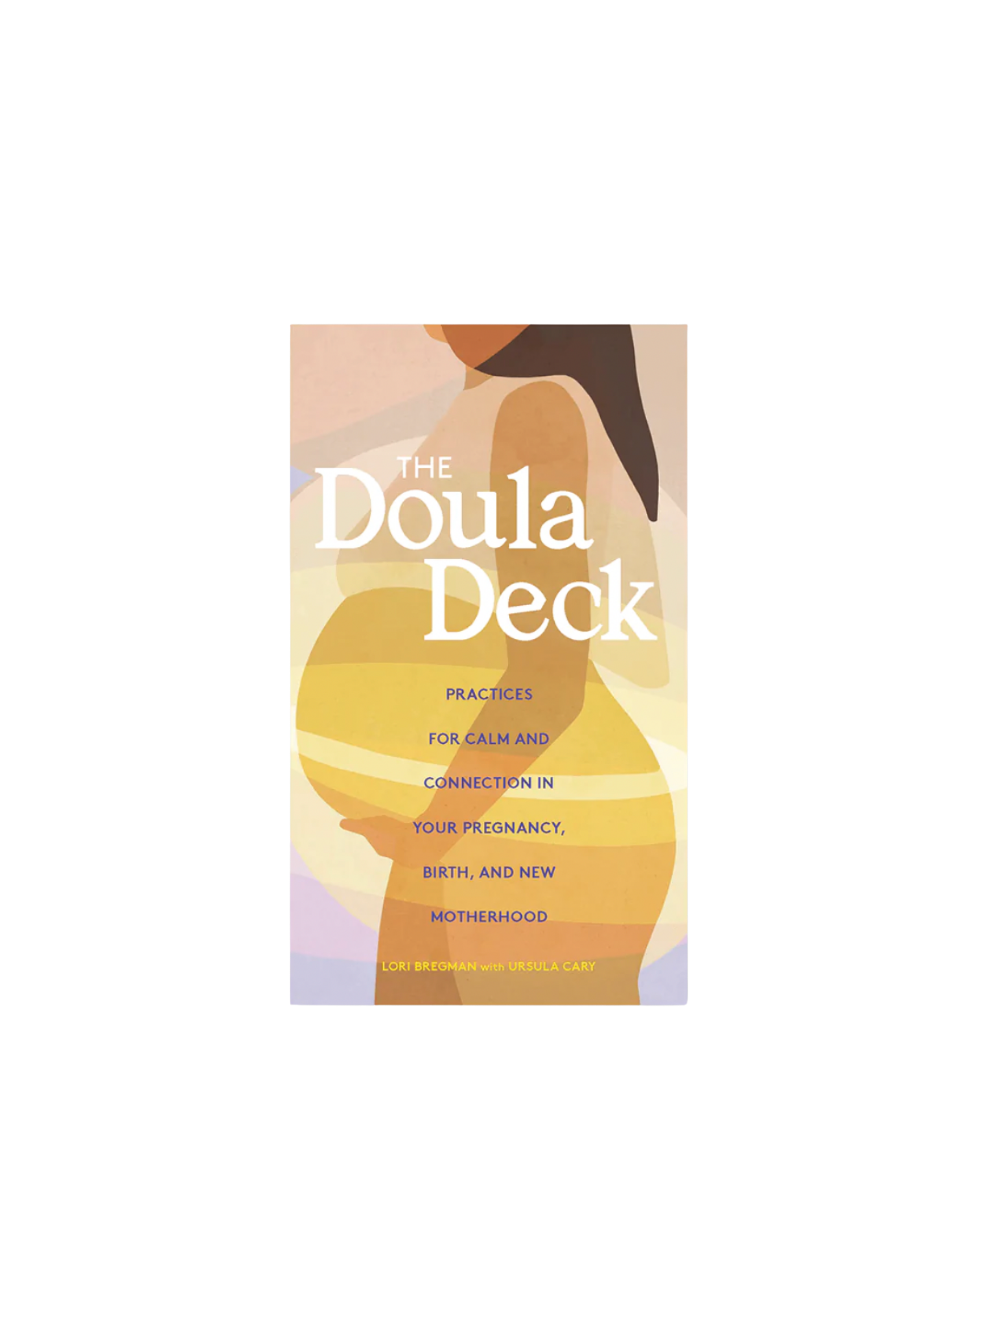 A card deck focused around meditation, breath work, and movement specifically for those expecting. 